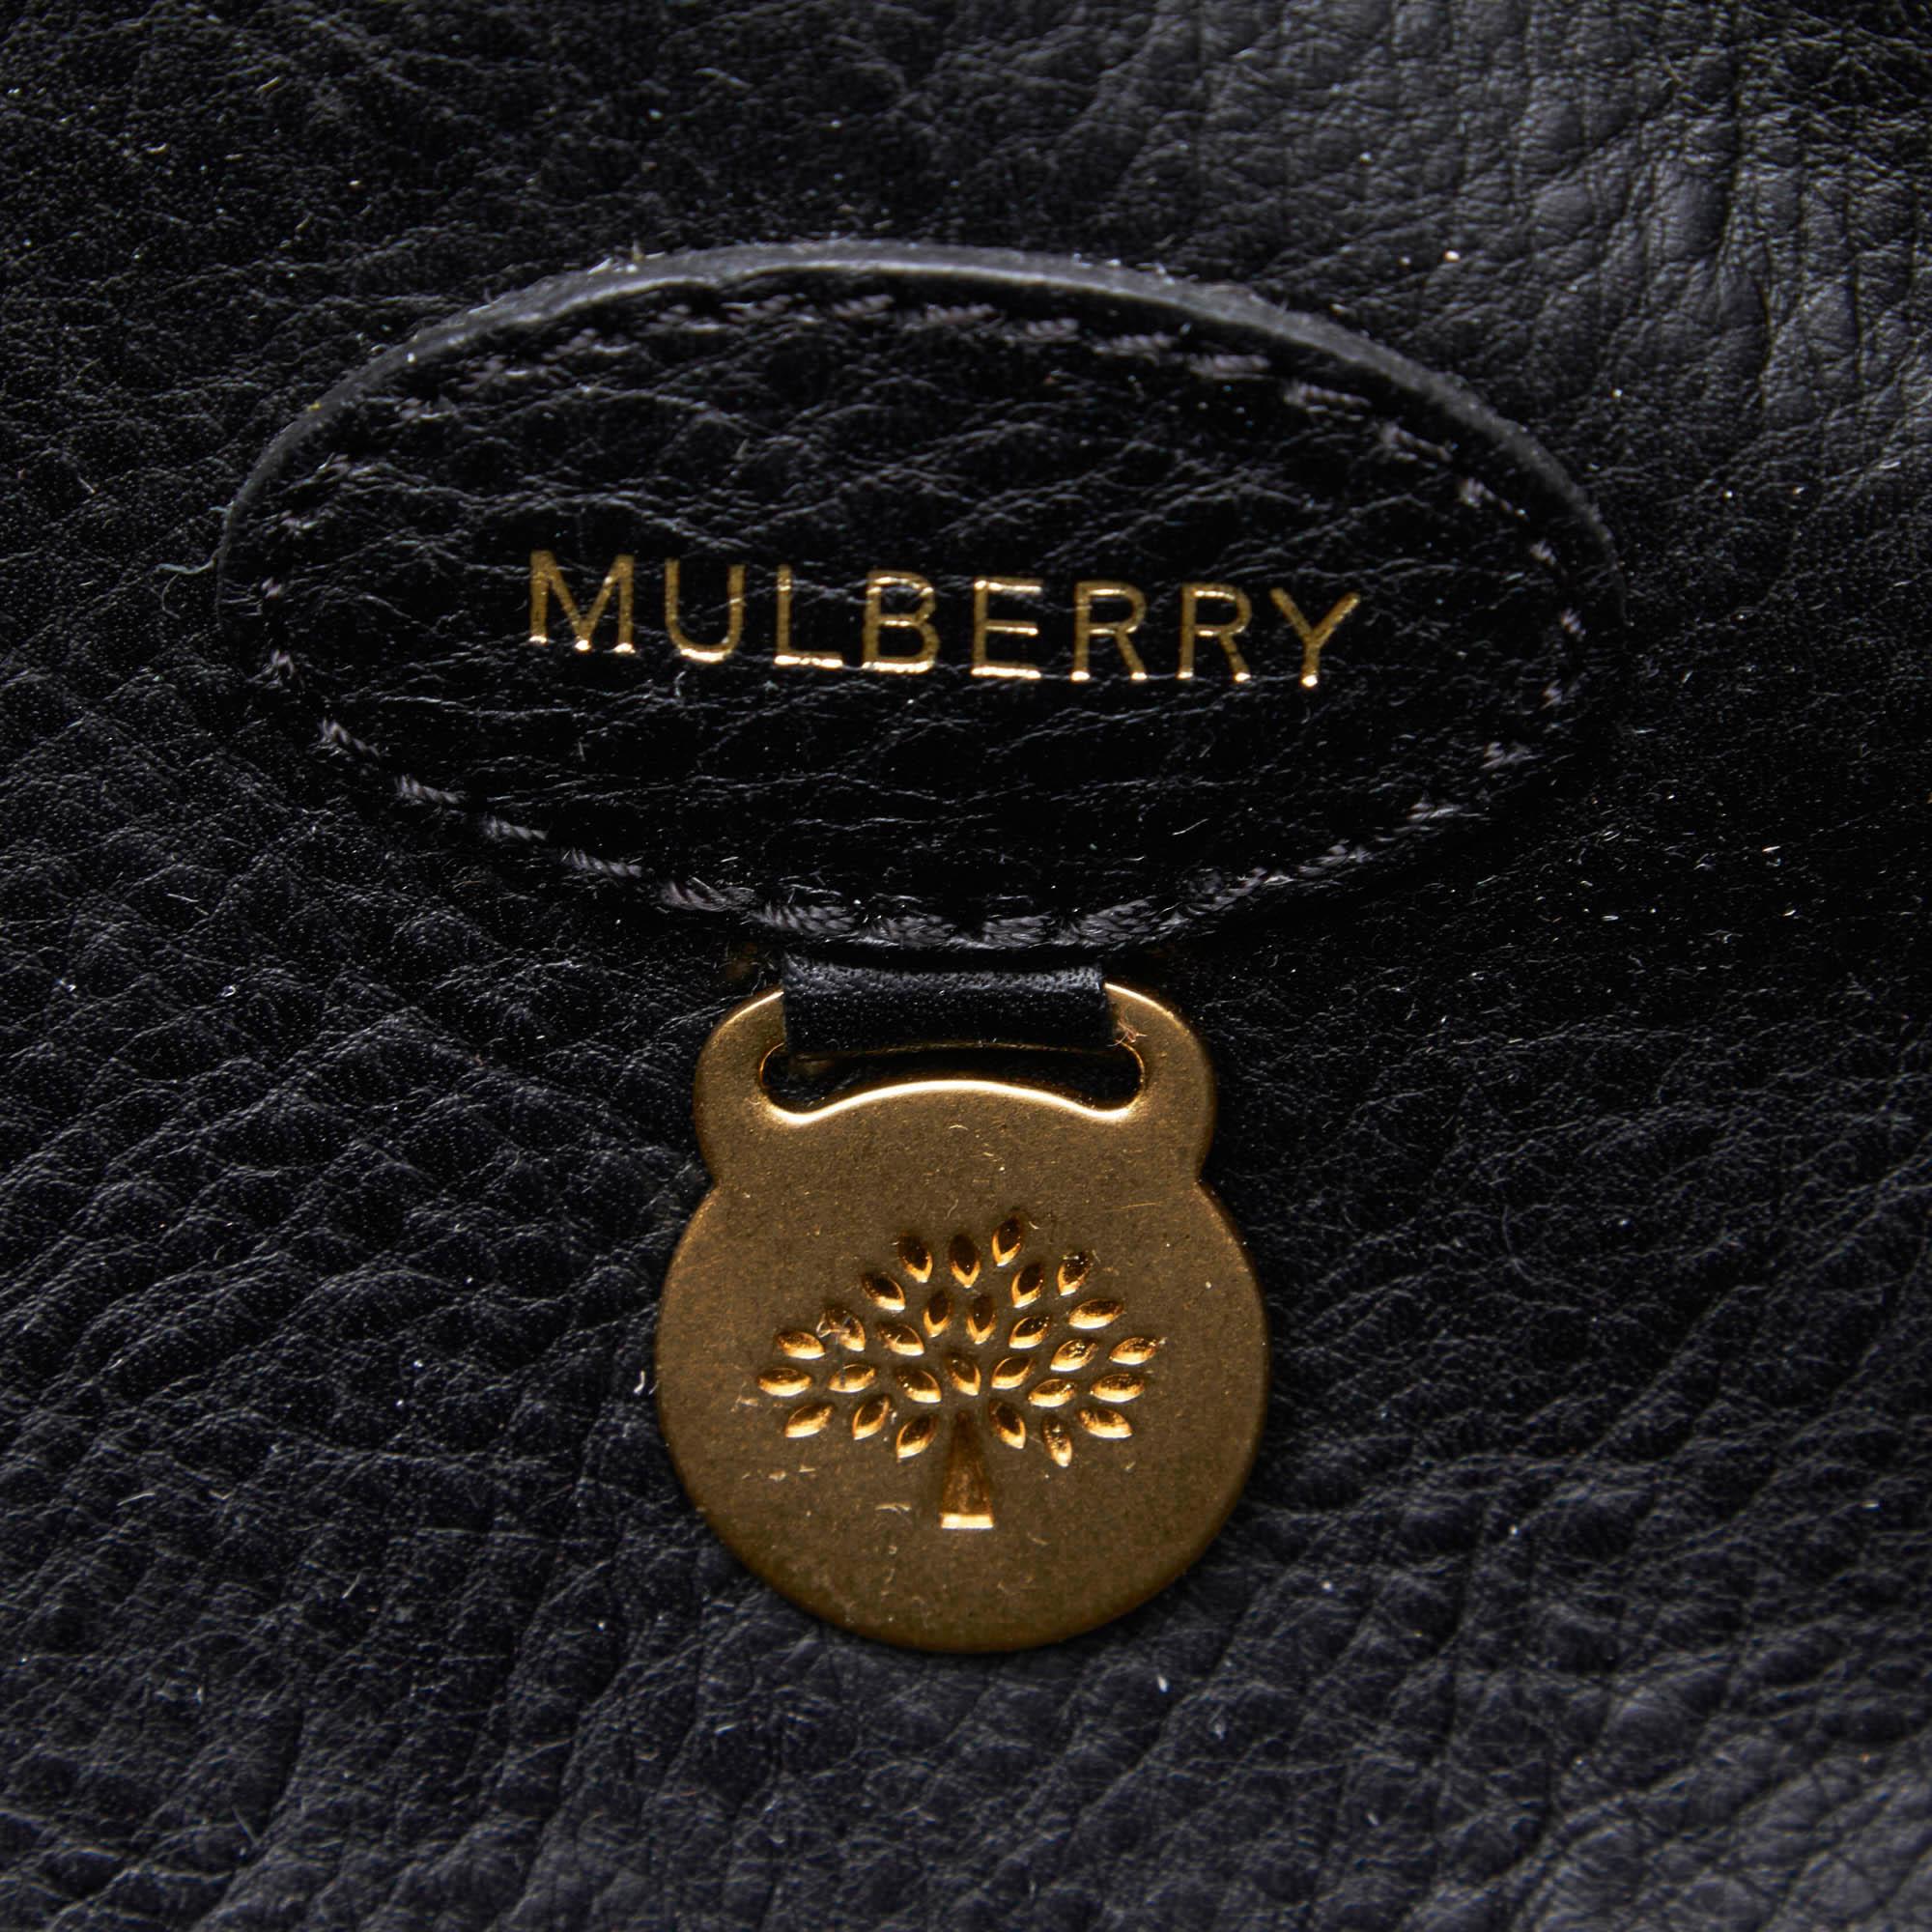 Vintage Authentic Mulberry Leather Bayswater Handbag w Dust Bag Padlock LARGE  In Good Condition For Sale In Orlando, FL